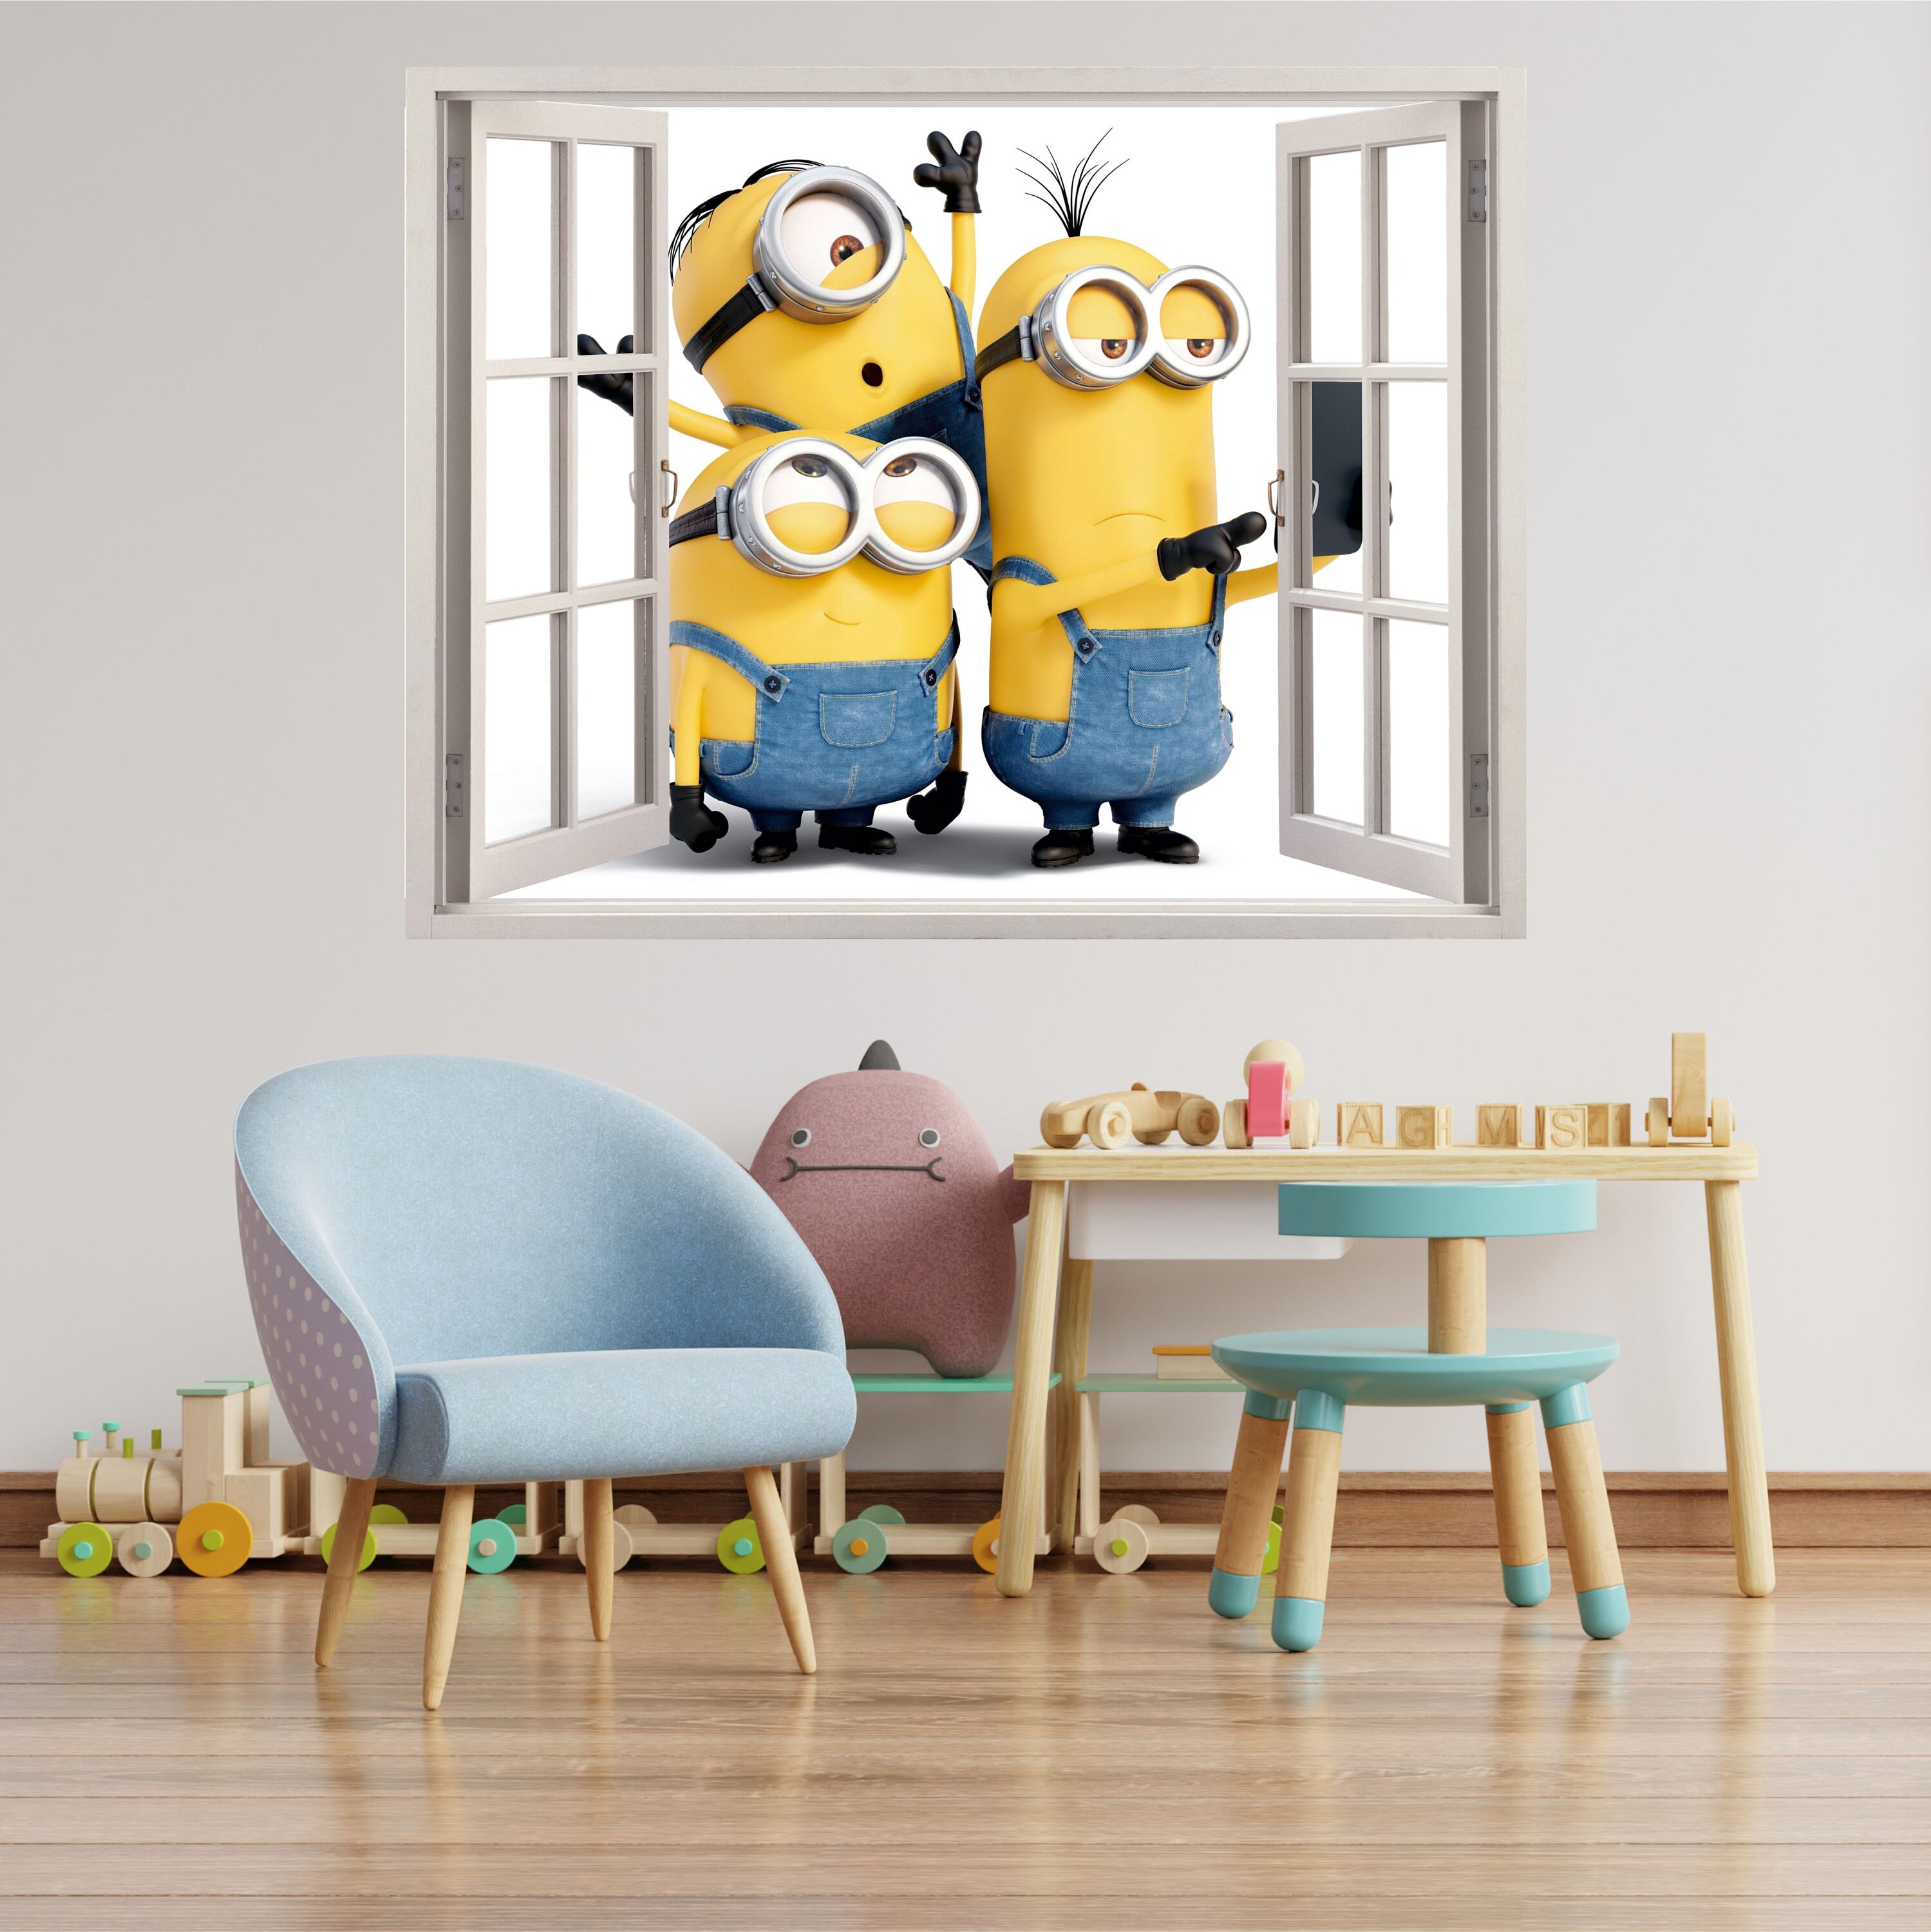 8 Inch Dr Nefario Doctor Minion Despicable Me Removable Wall Decal Sticker  Art Home Decor Kids Room-8 Inch Wide by 8 1/2 Inch Tall